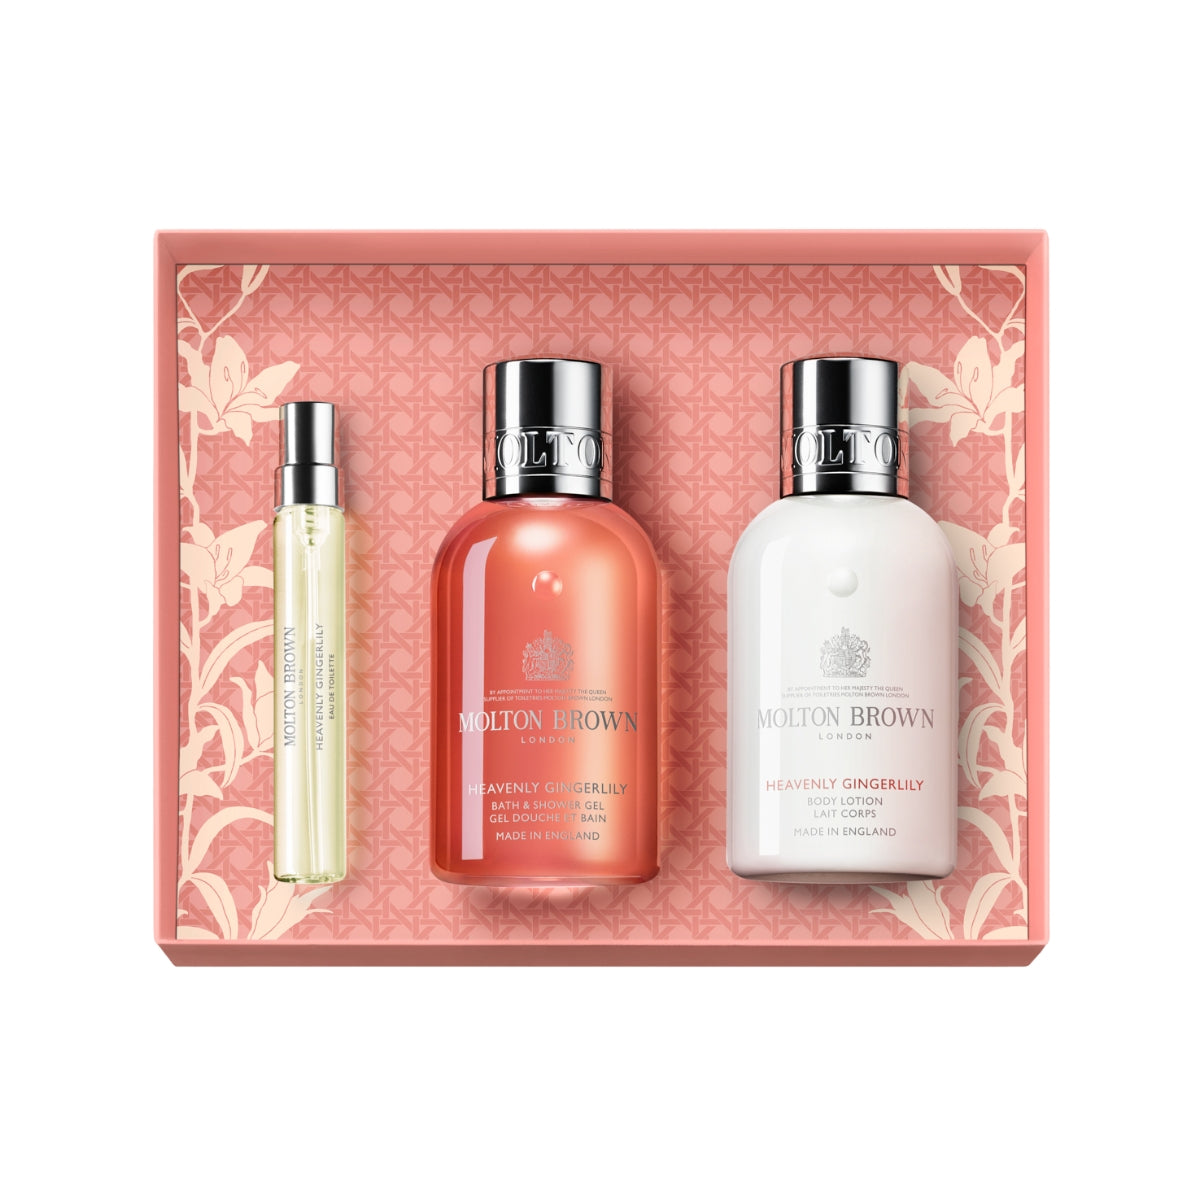 Molton Brown Limited Edition Heavenly Gingerlily Travel Gift Set